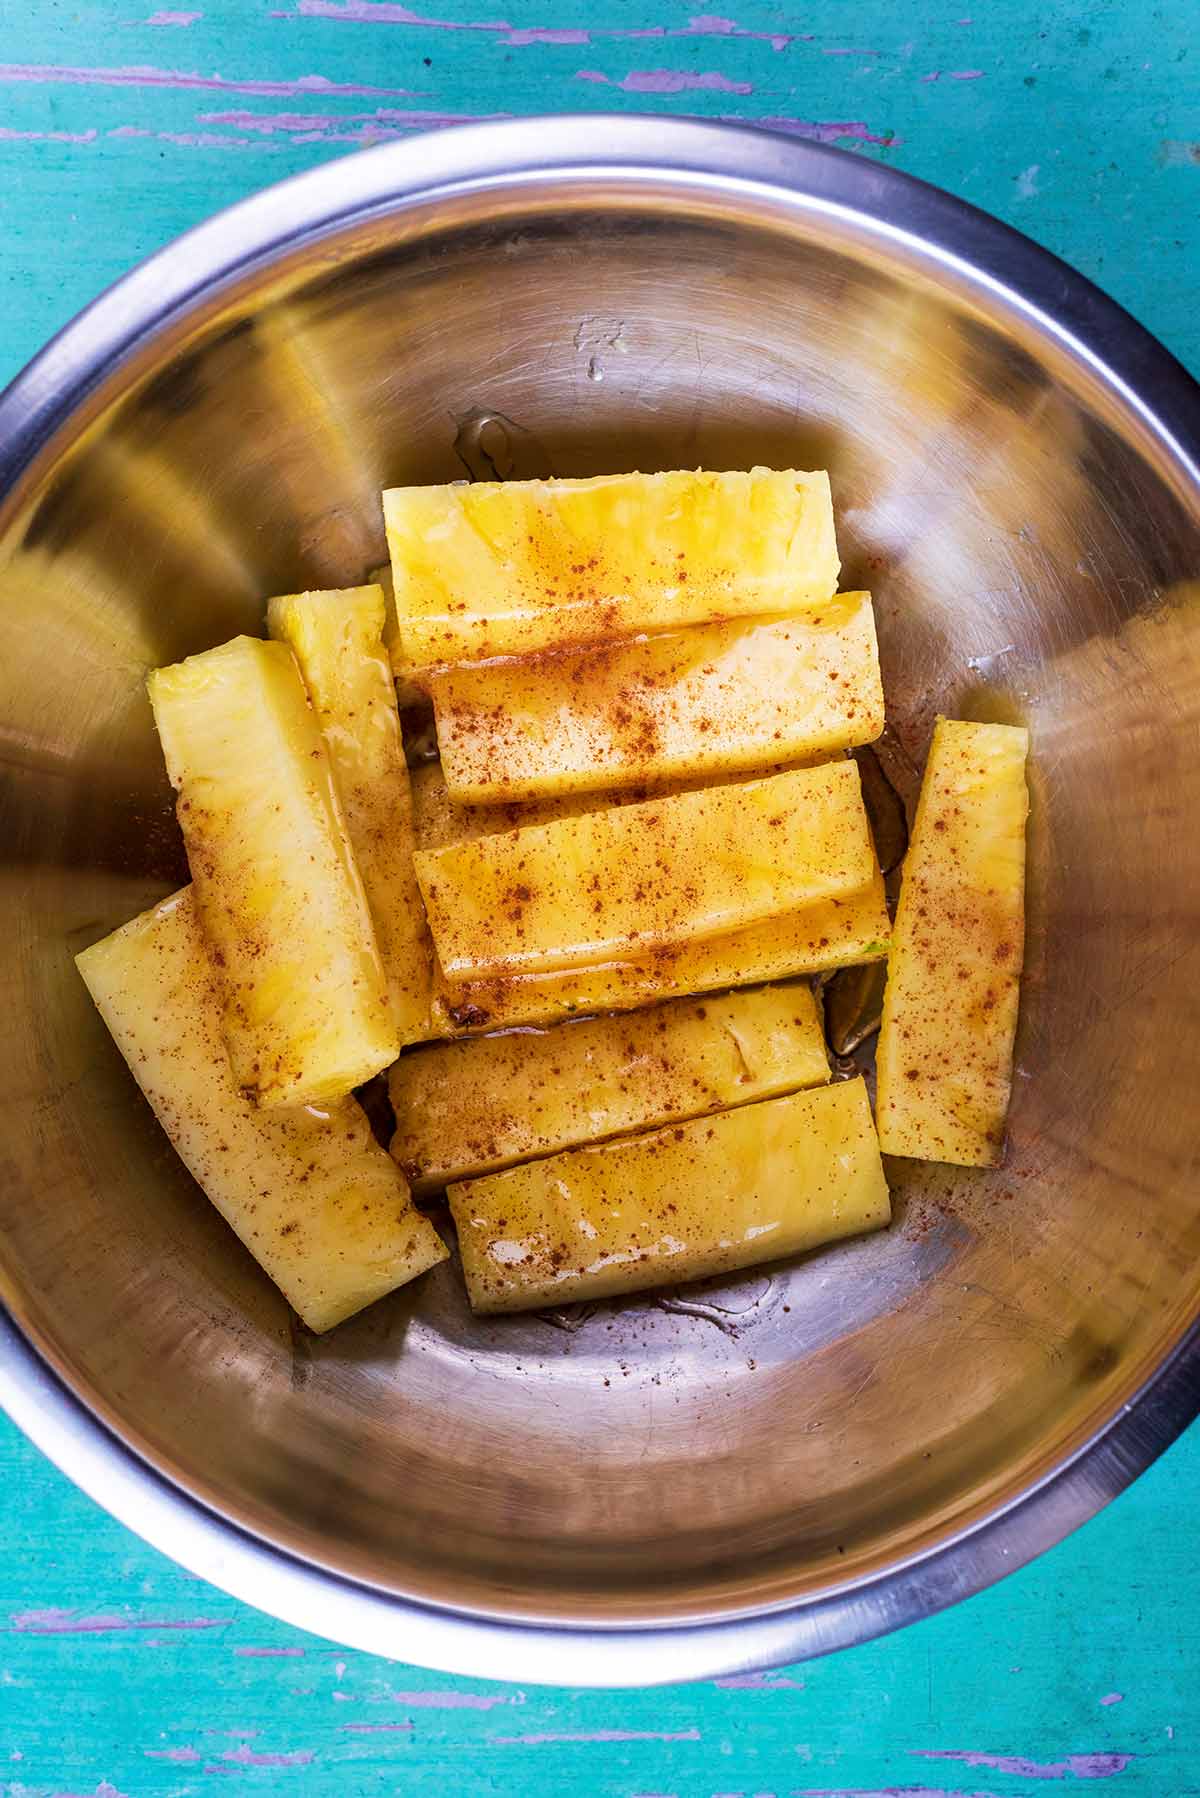 A mixing bowl containing sticks of pineapple covered in honey and cinnamon.